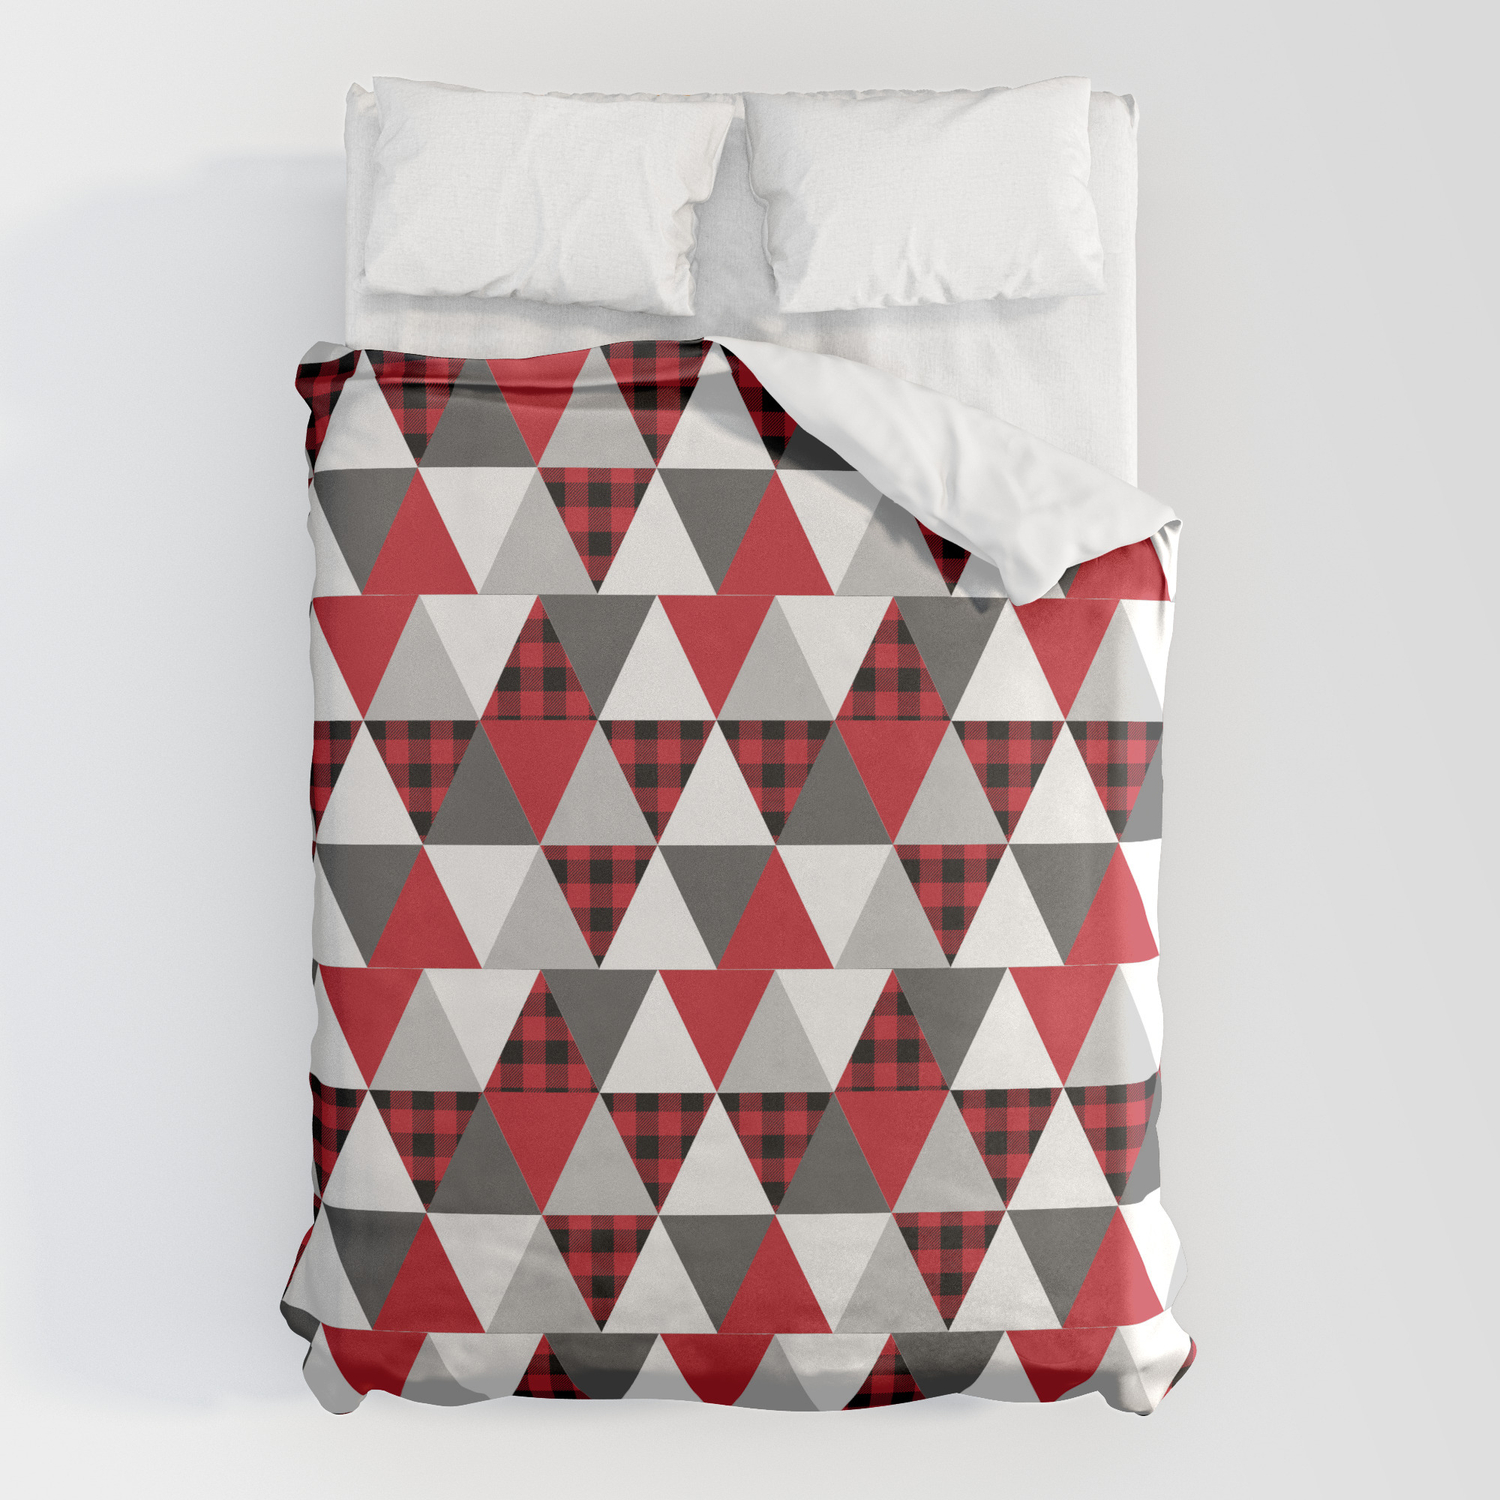 Quilt Pattern Buffalo Check Red, Red Black And White Duvet Cover